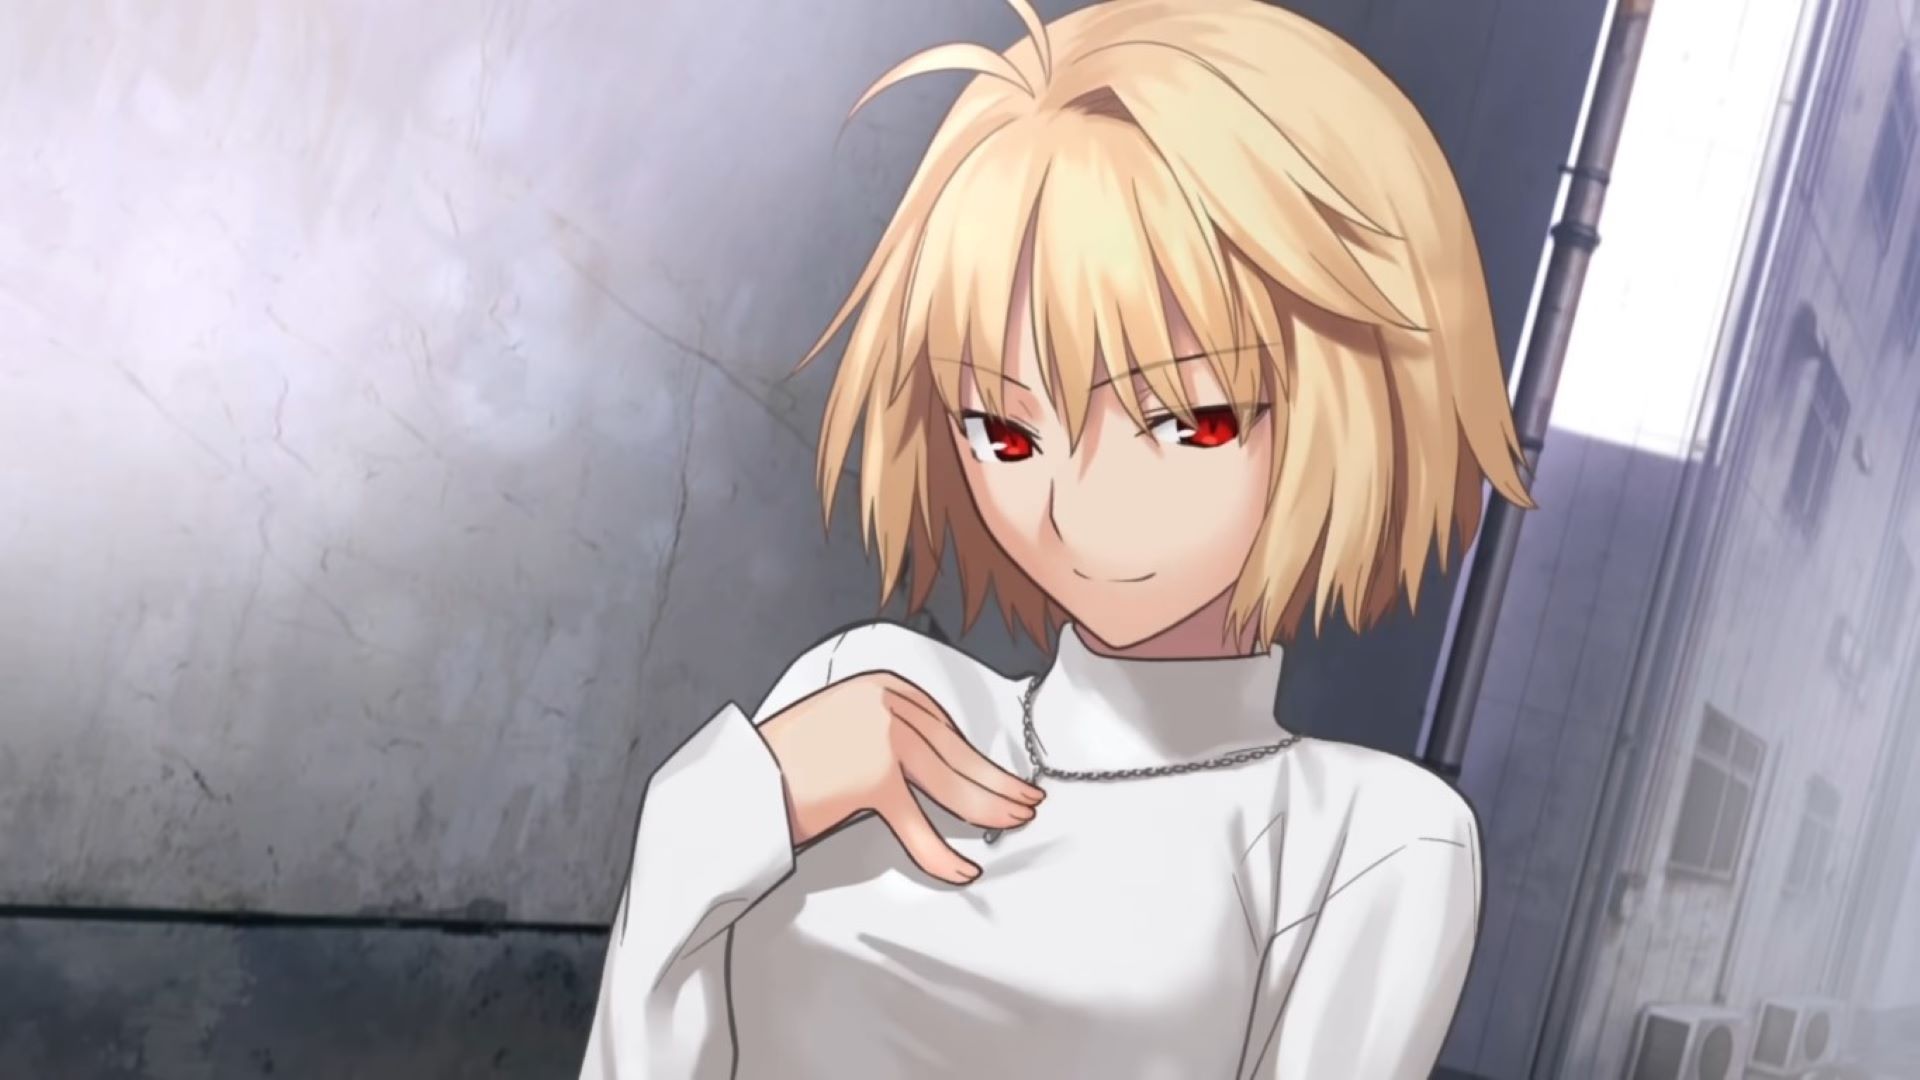 Tsukihime Visual Novel Remakes Opening Animation Video by ufotable  Streamed  News  Anime News Network